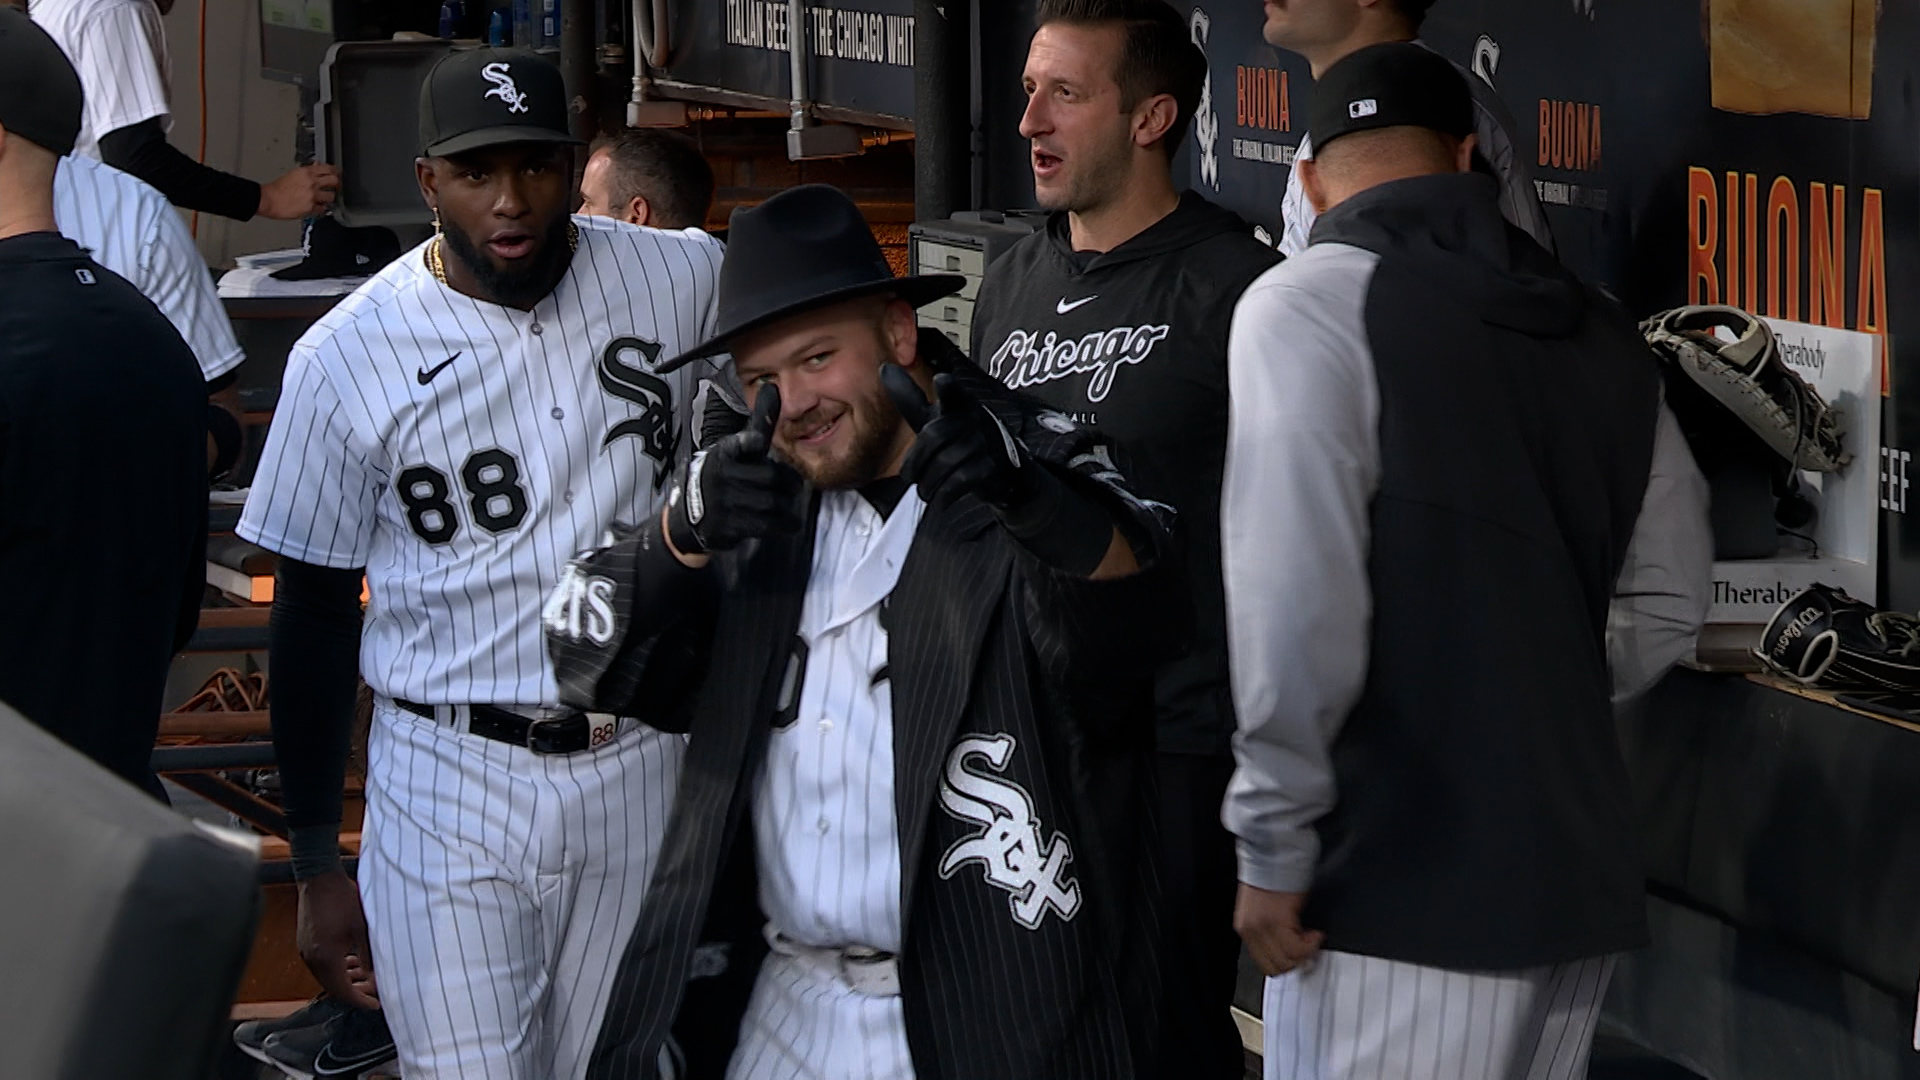 Burger debuts 'Chicago mobster' home run celebration – NBC Sports Chicago